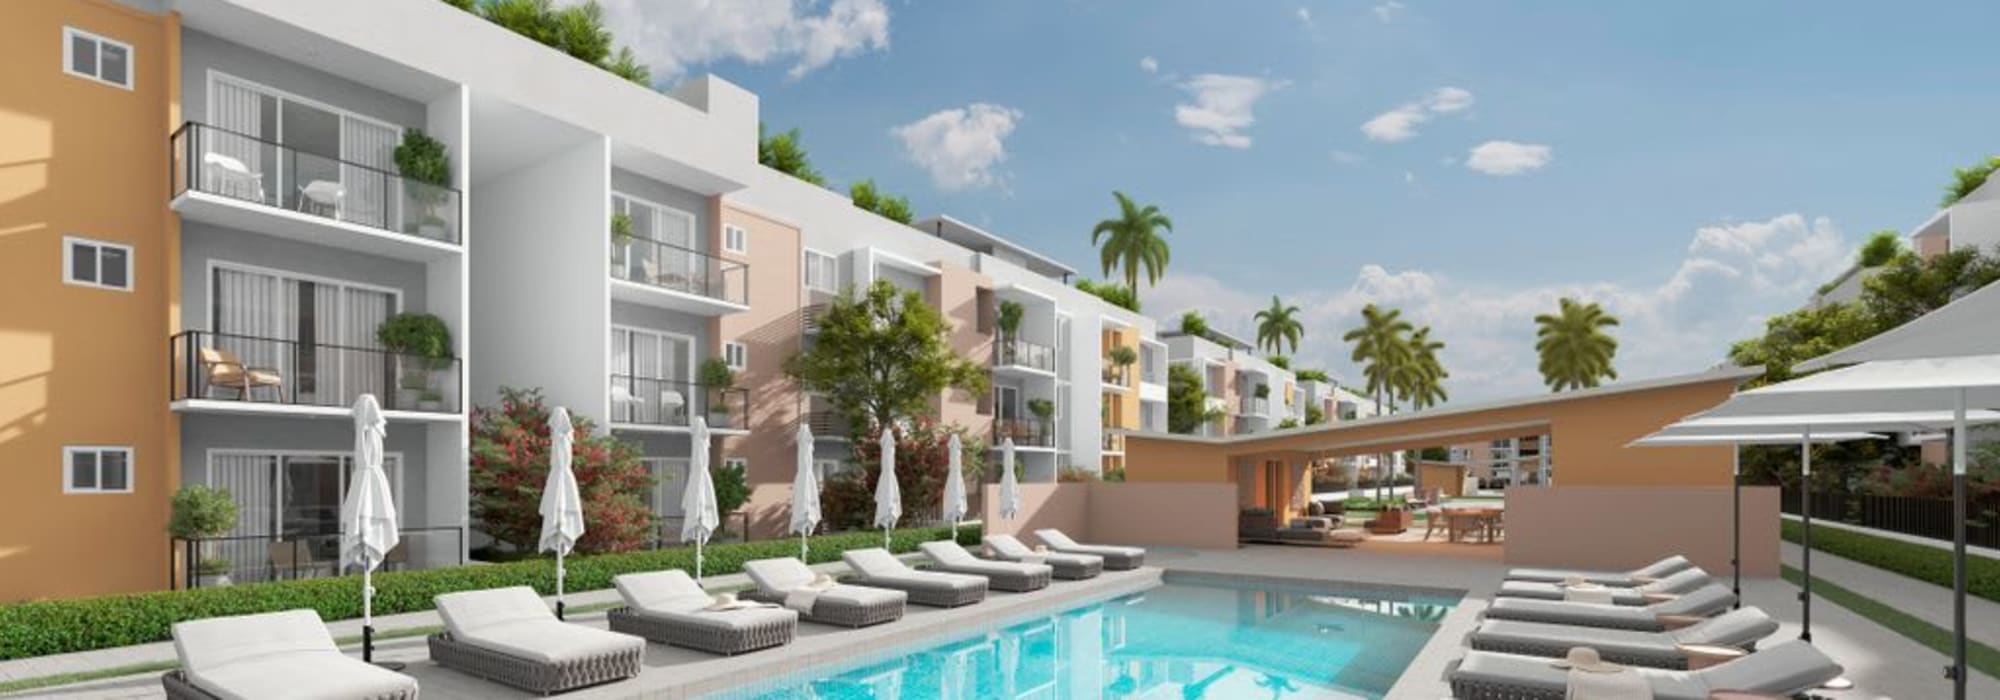 Attractive Apartments in Punta Cana